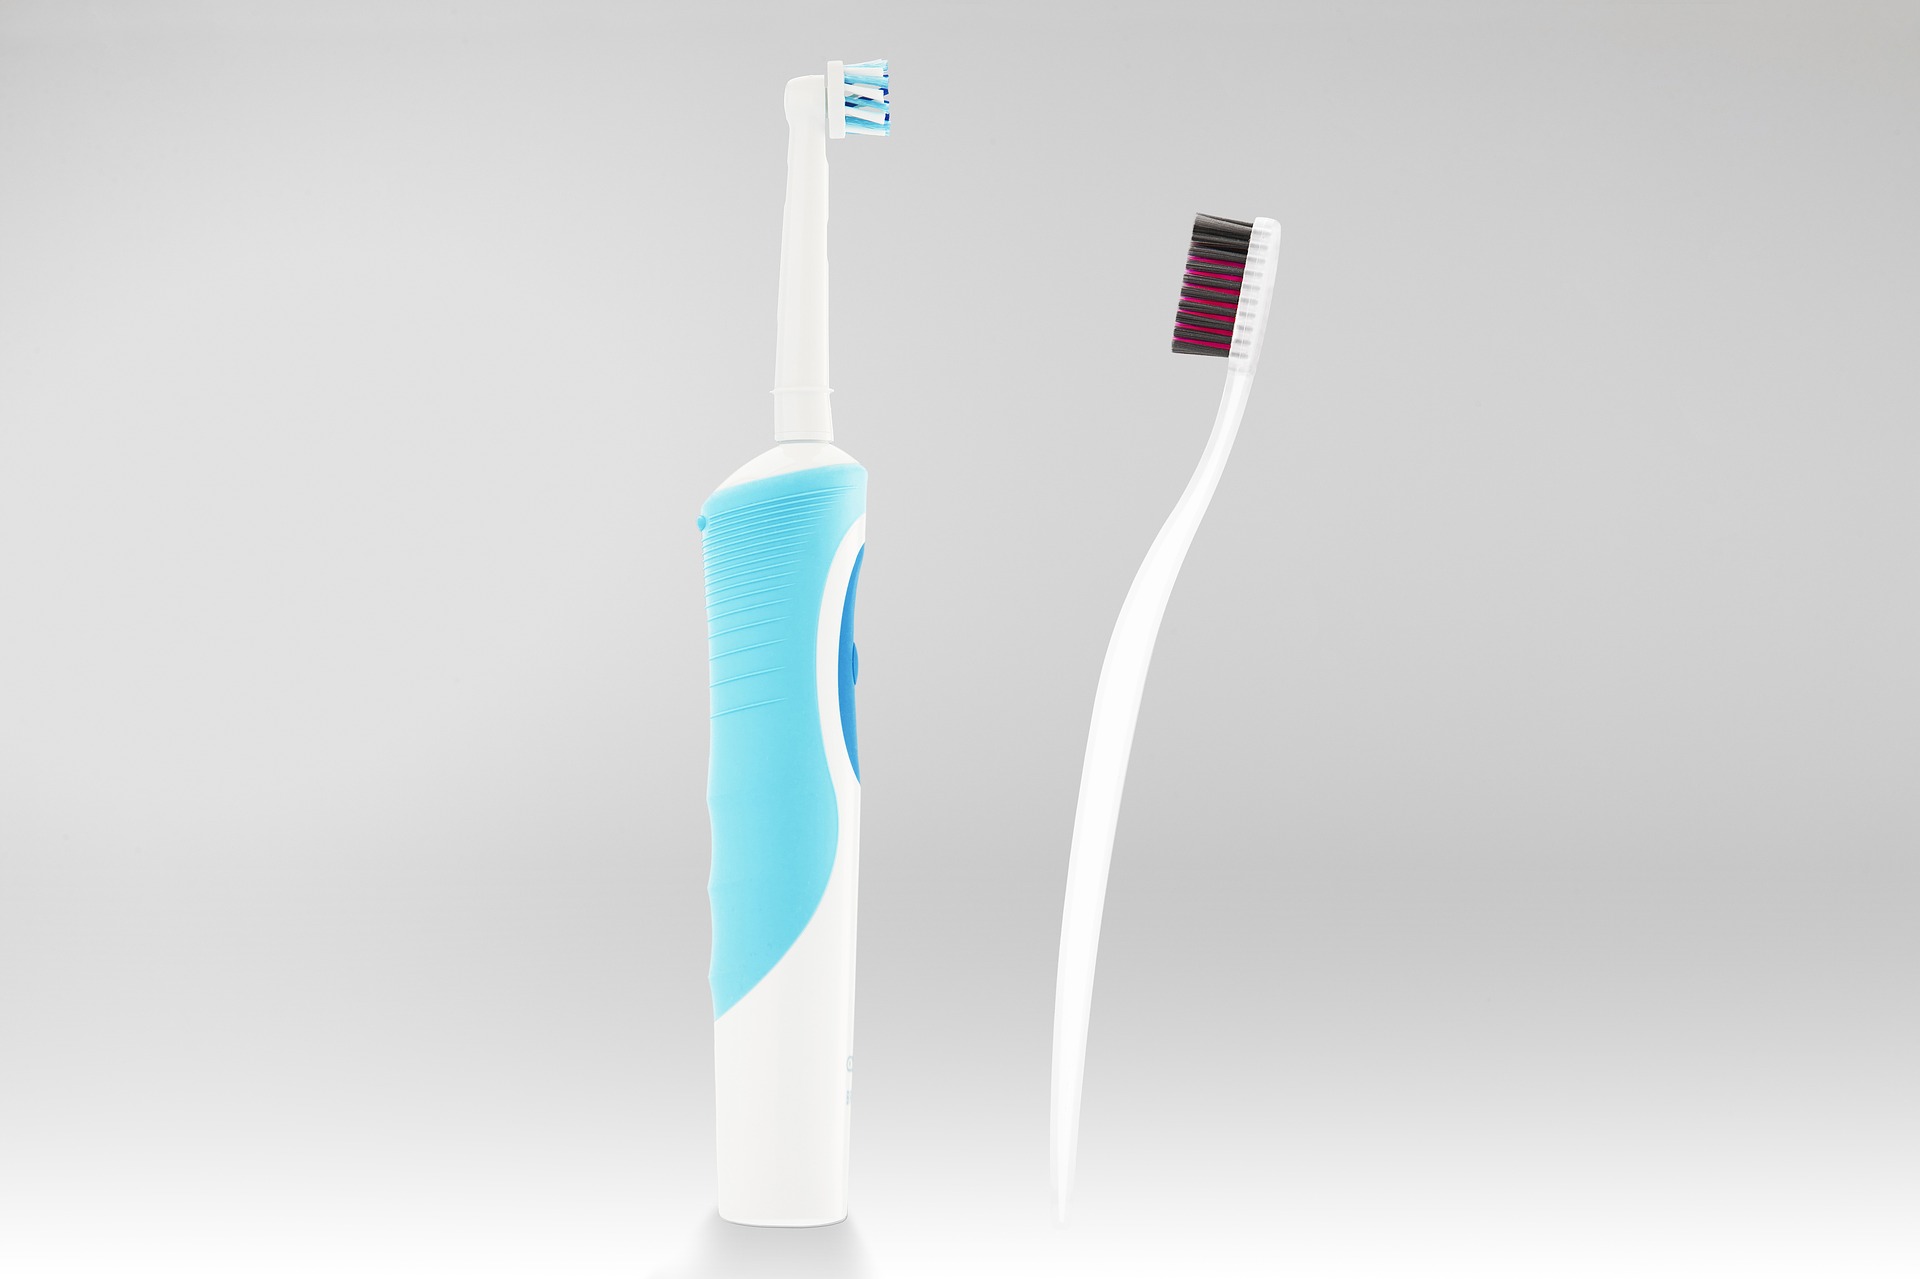 An electric and a manual toothbrush